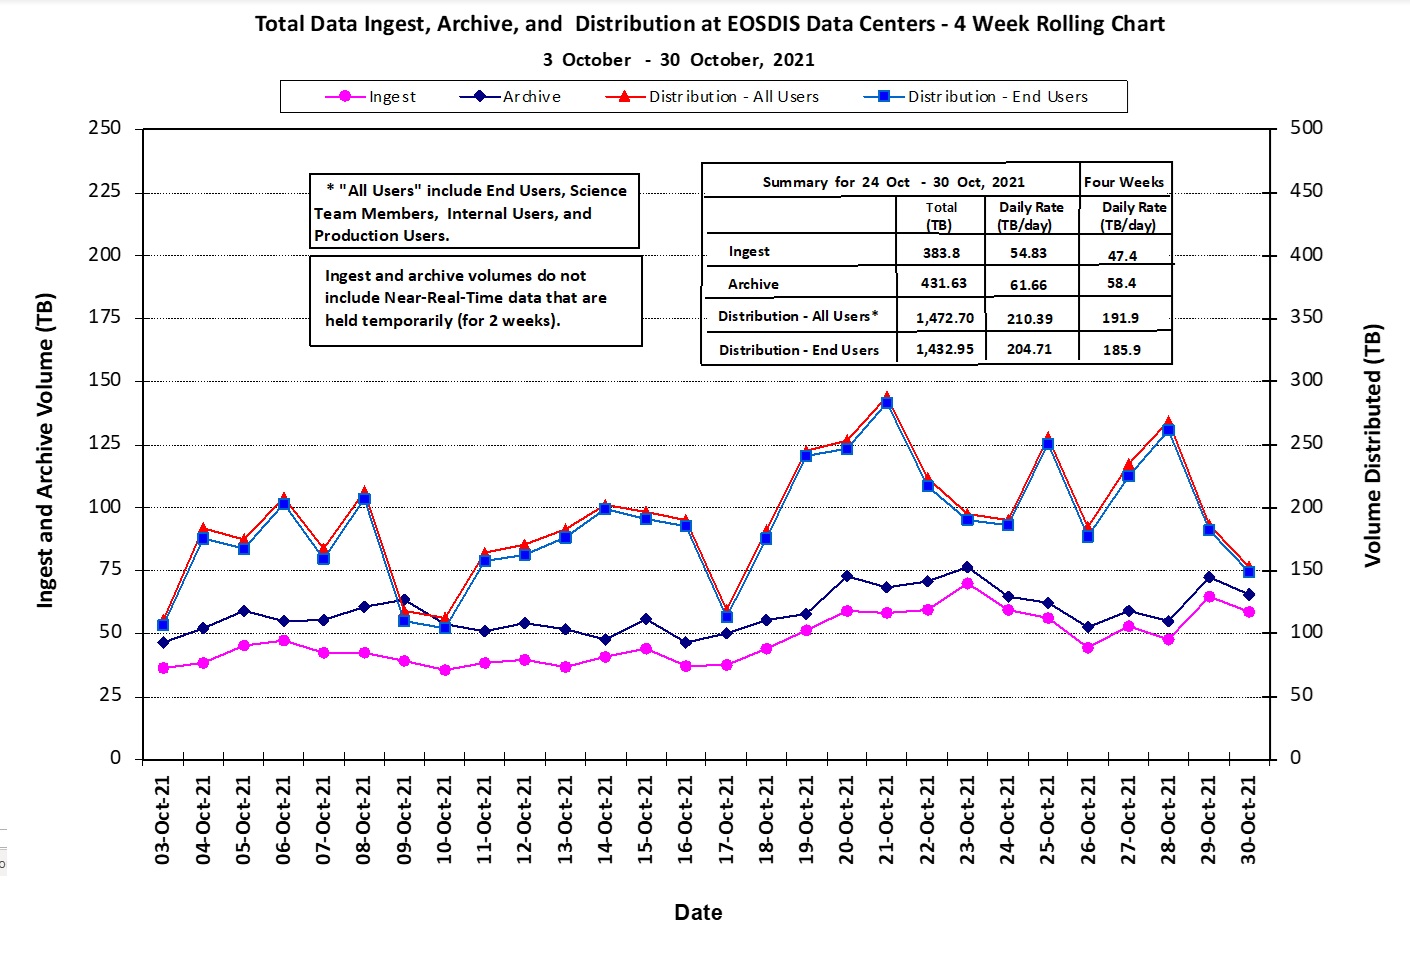 Total data ingest, archive, and distribution at EOSDIS Data Centers, 4-week rolling chart